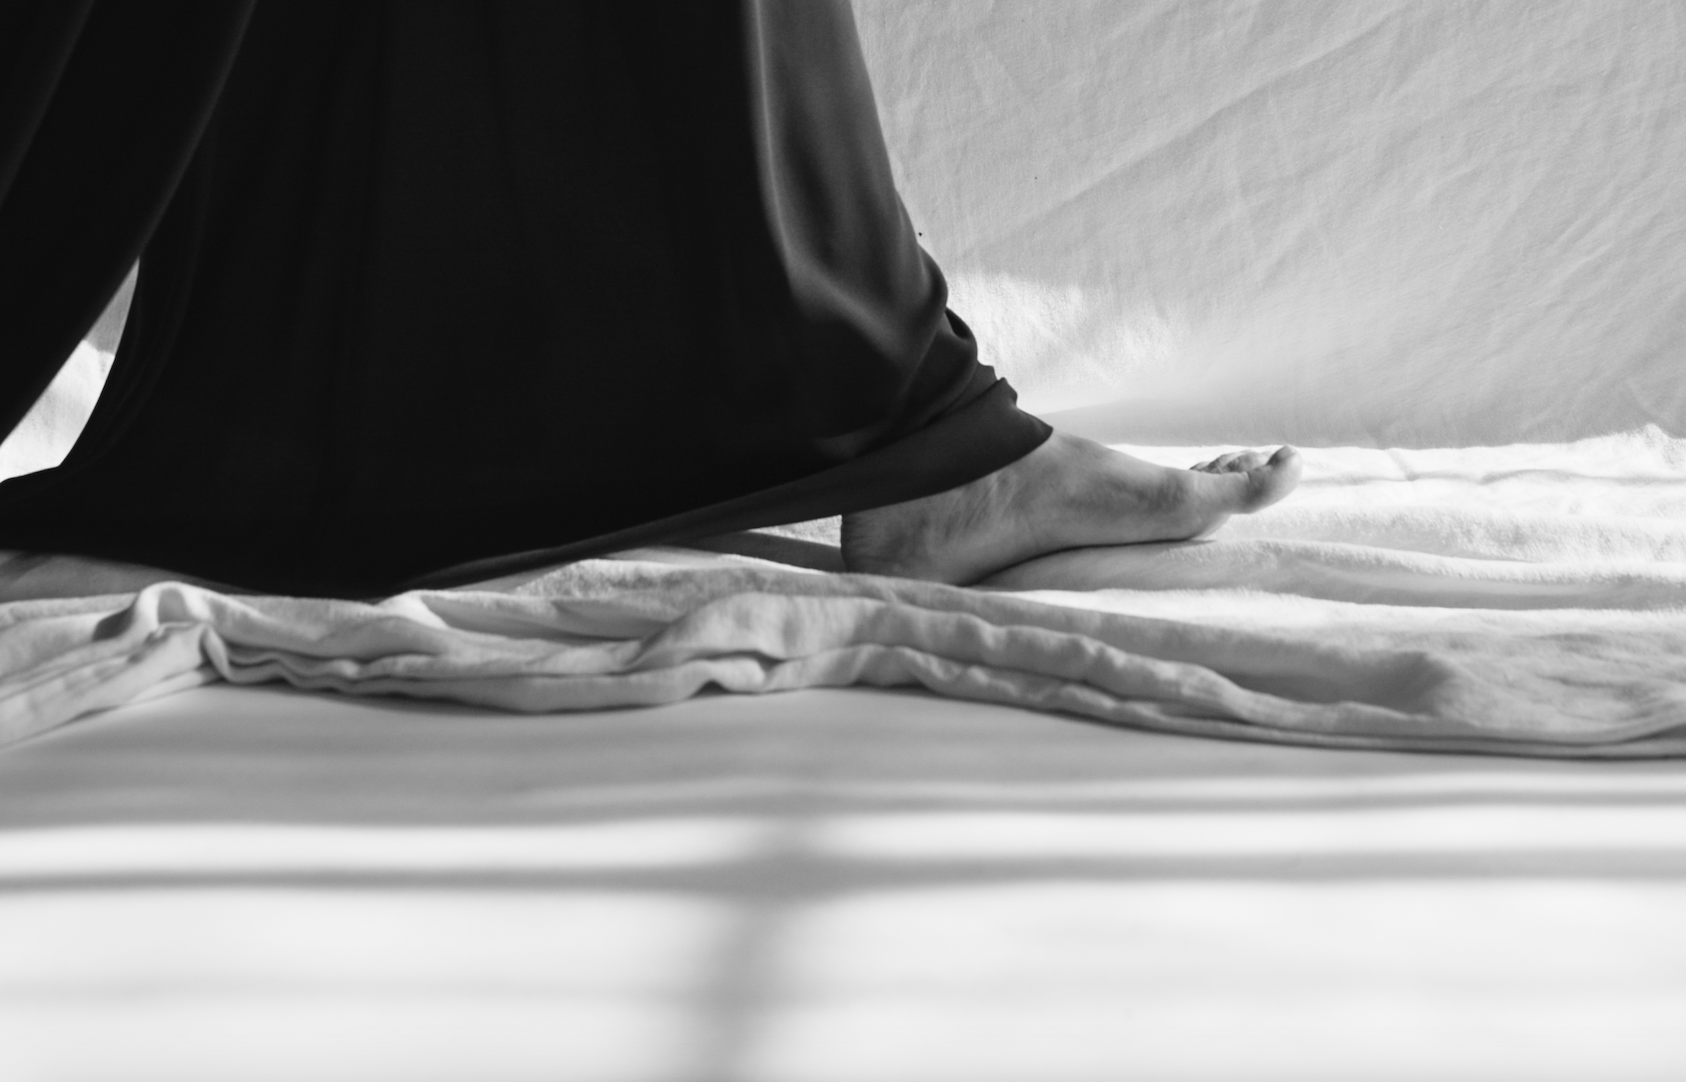 black and white image of feet walking on cloth draped on floor, woman is wearing wide-legged flowing pants